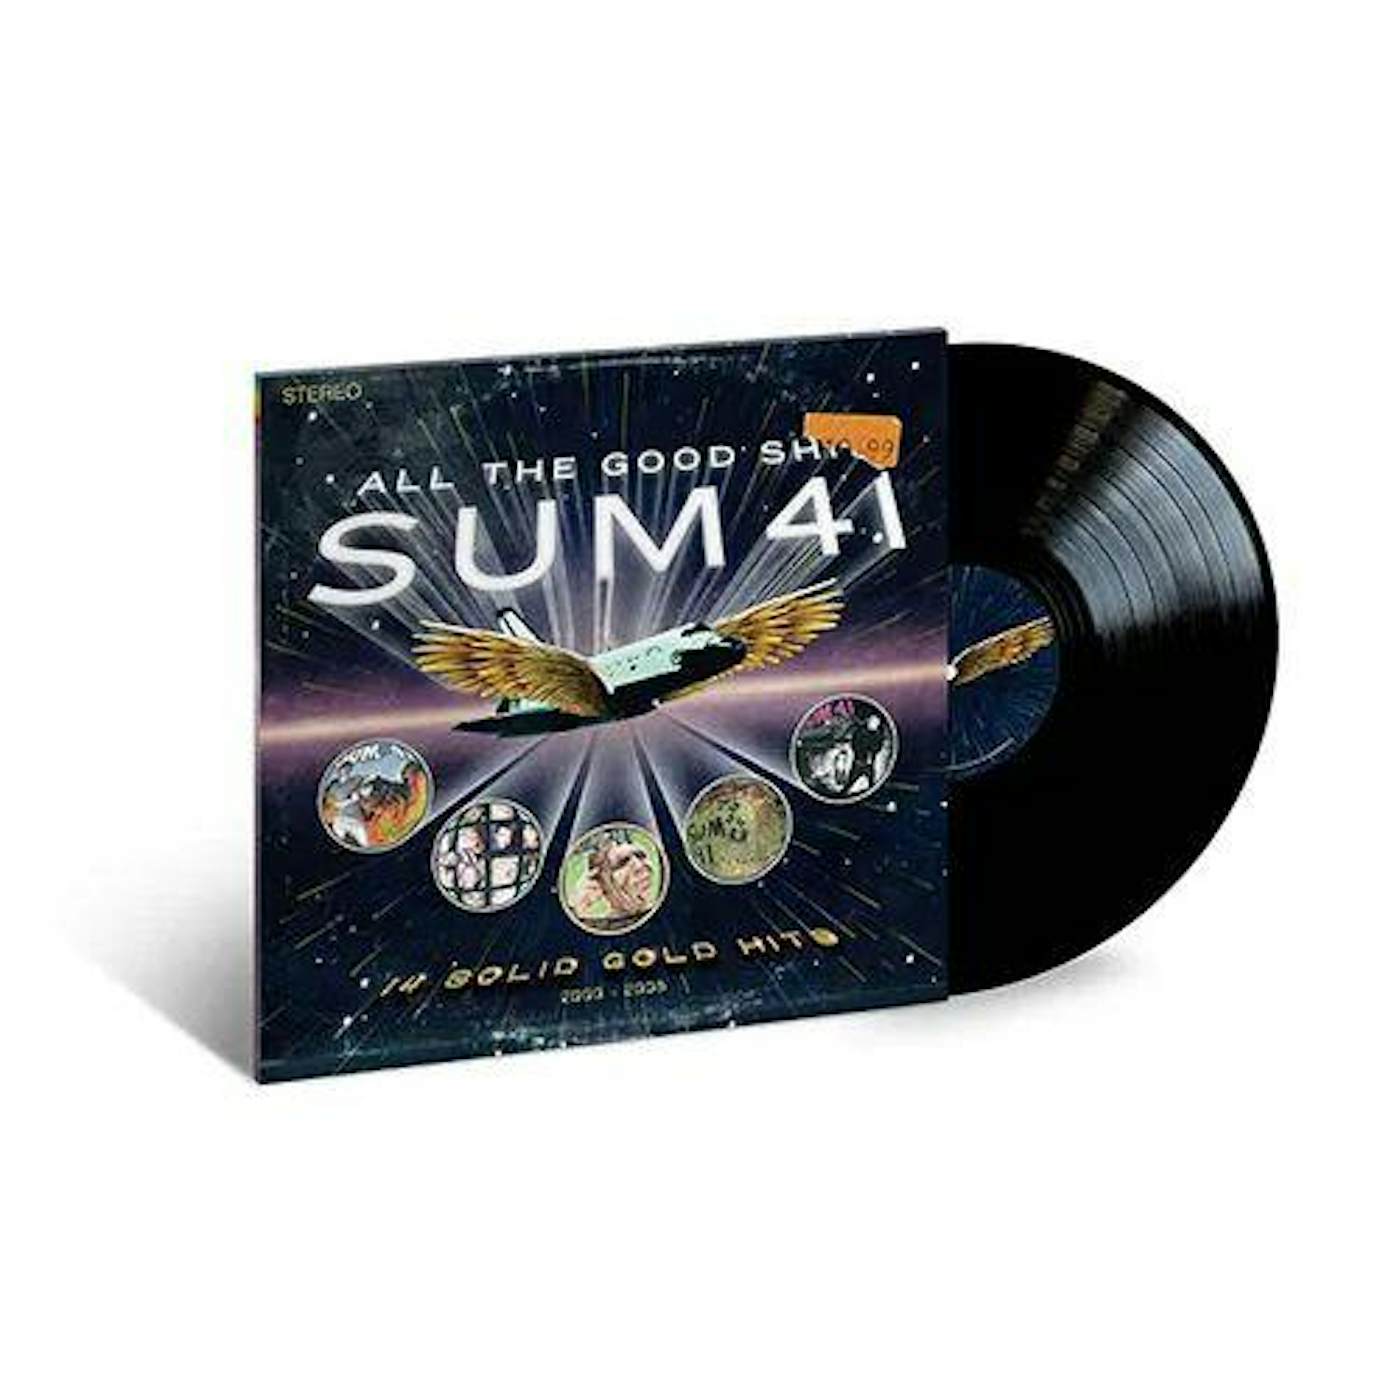 2000's Throwback Vibes Songs, Sum 41 - Pieces (📌Pieces was release